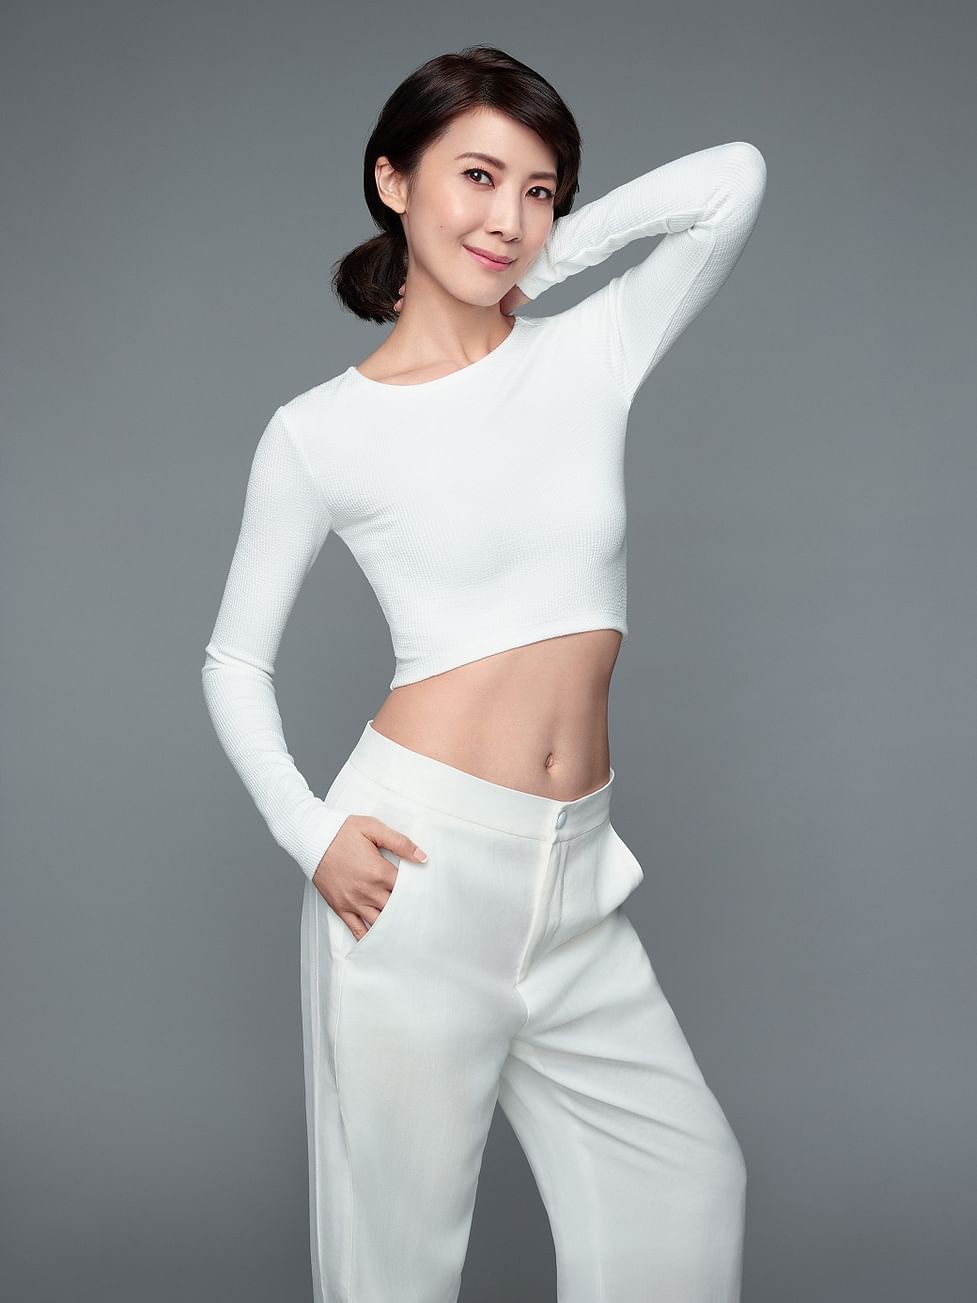 Jeanette Aw's shapely figure is partly thanks to fat-freezing